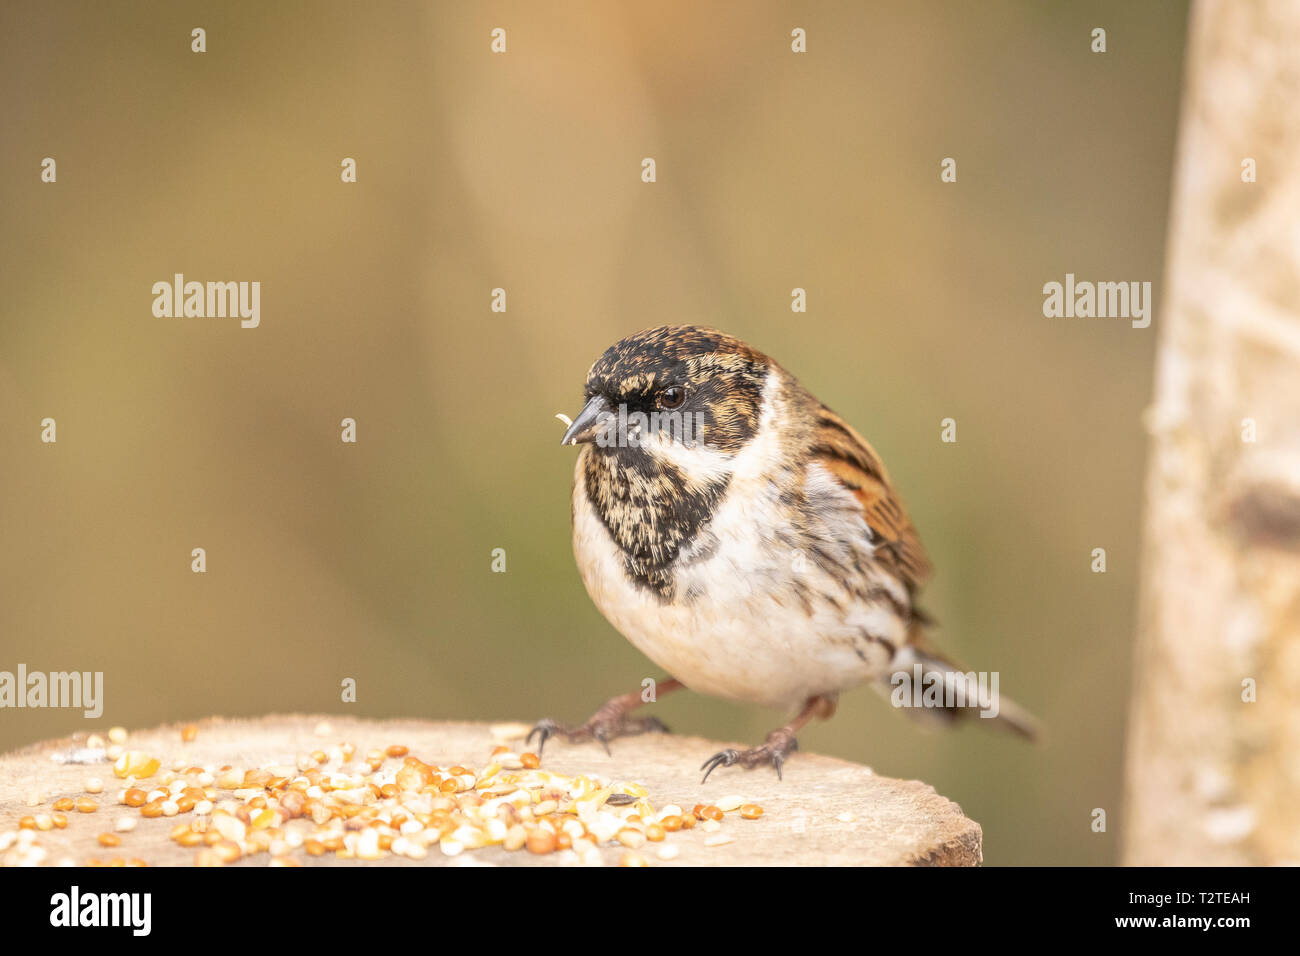 Reed bunting (Emberiza schoeniclus) perched on log with seed around its feet Stock Photo